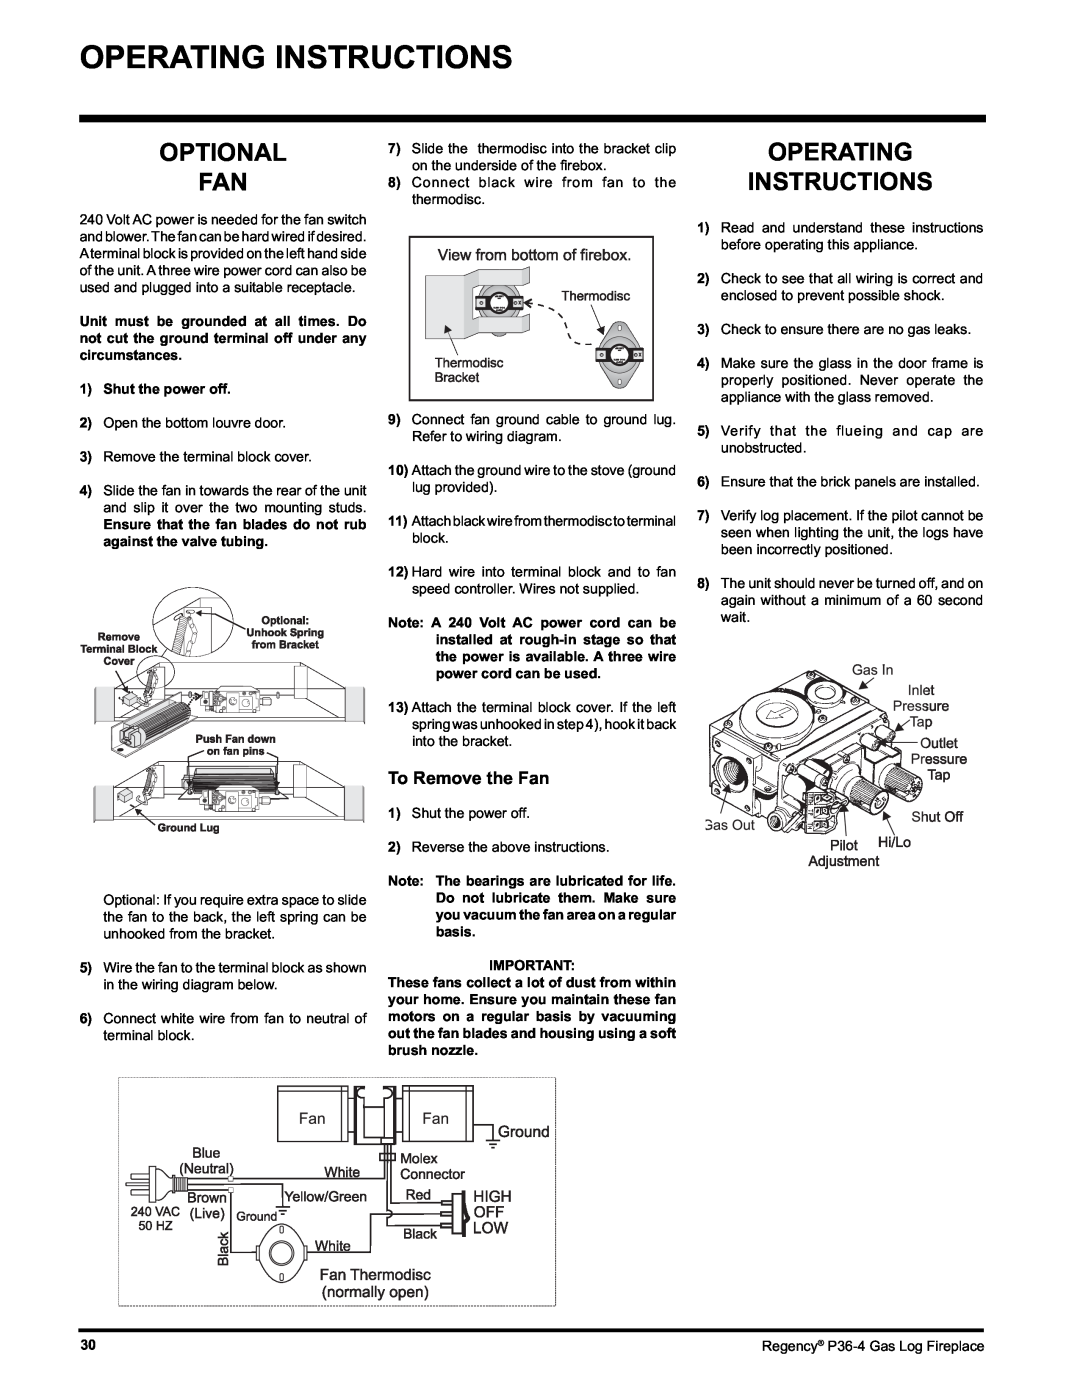 Regency Wraps P36-LPG4, P36-NG4 manual Operating Instructions, Optional Fan, To Remove the Fan 